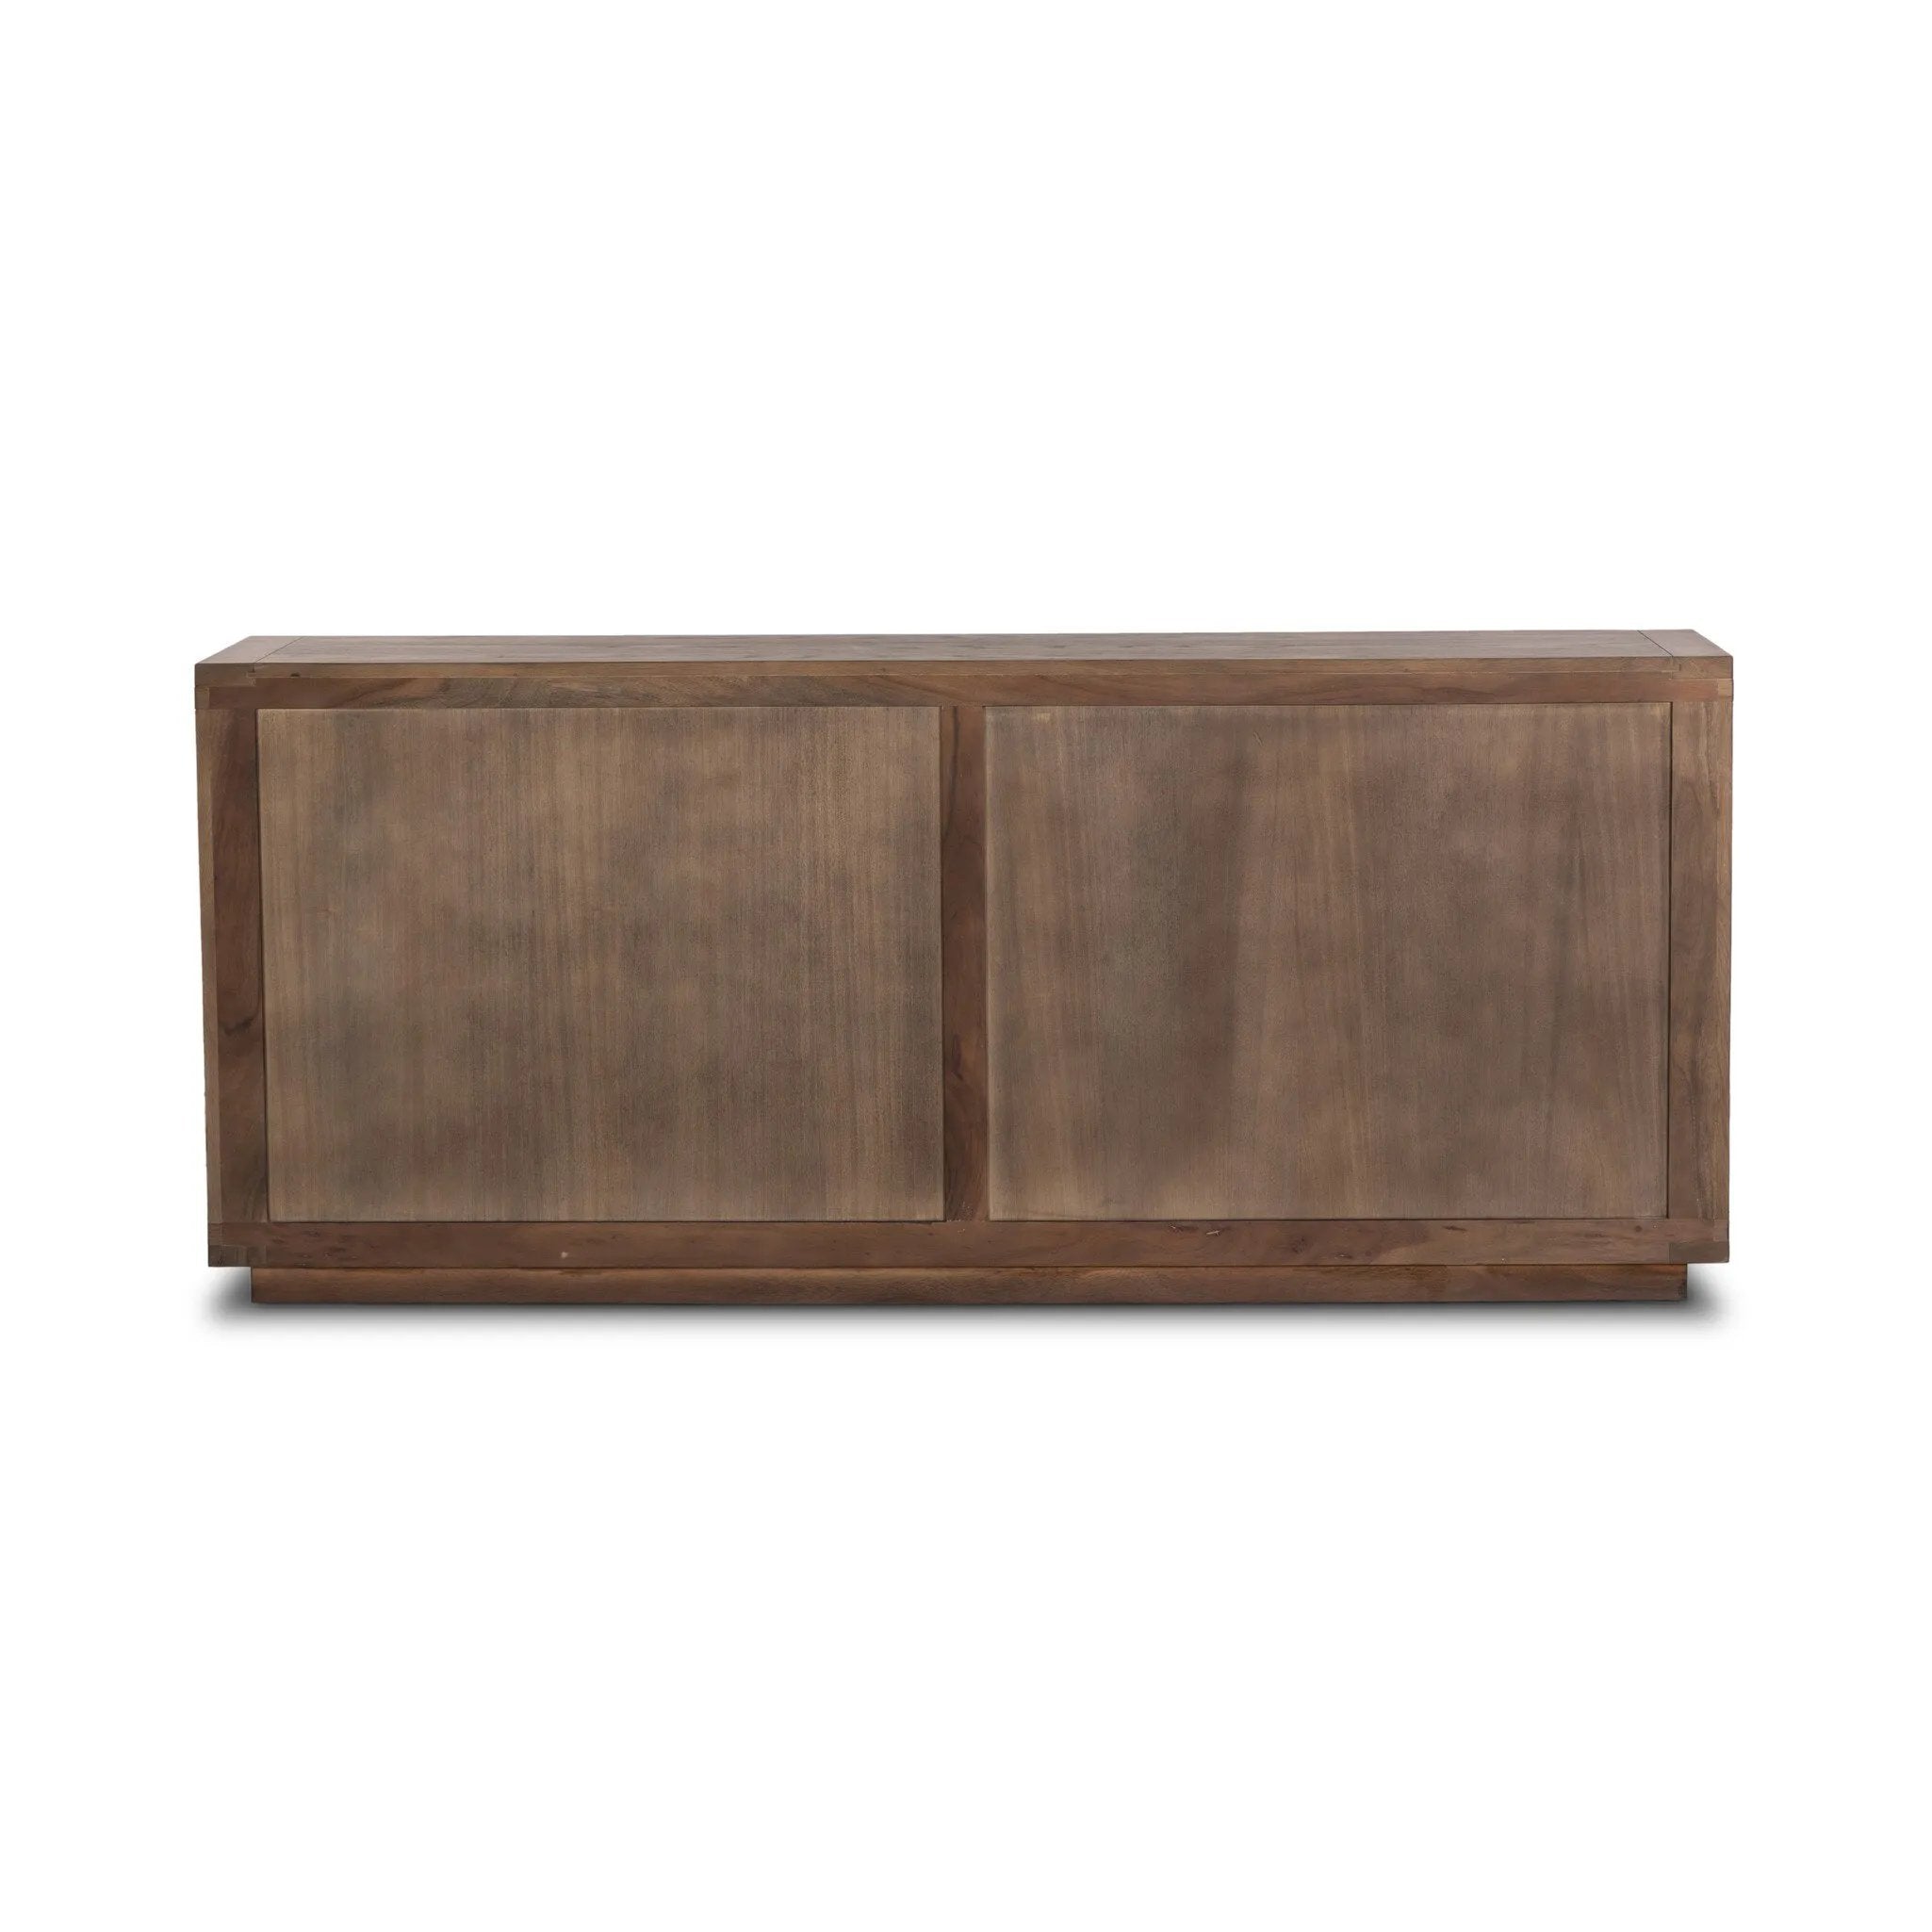 Worn oak shapes a streamlined box-style dresser, with lap joint corners for a detail-driven touch.Collection: Bennet Amethyst Home provides interior design, new home construction design consulting, vintage area rugs, and lighting in the San Diego metro area.